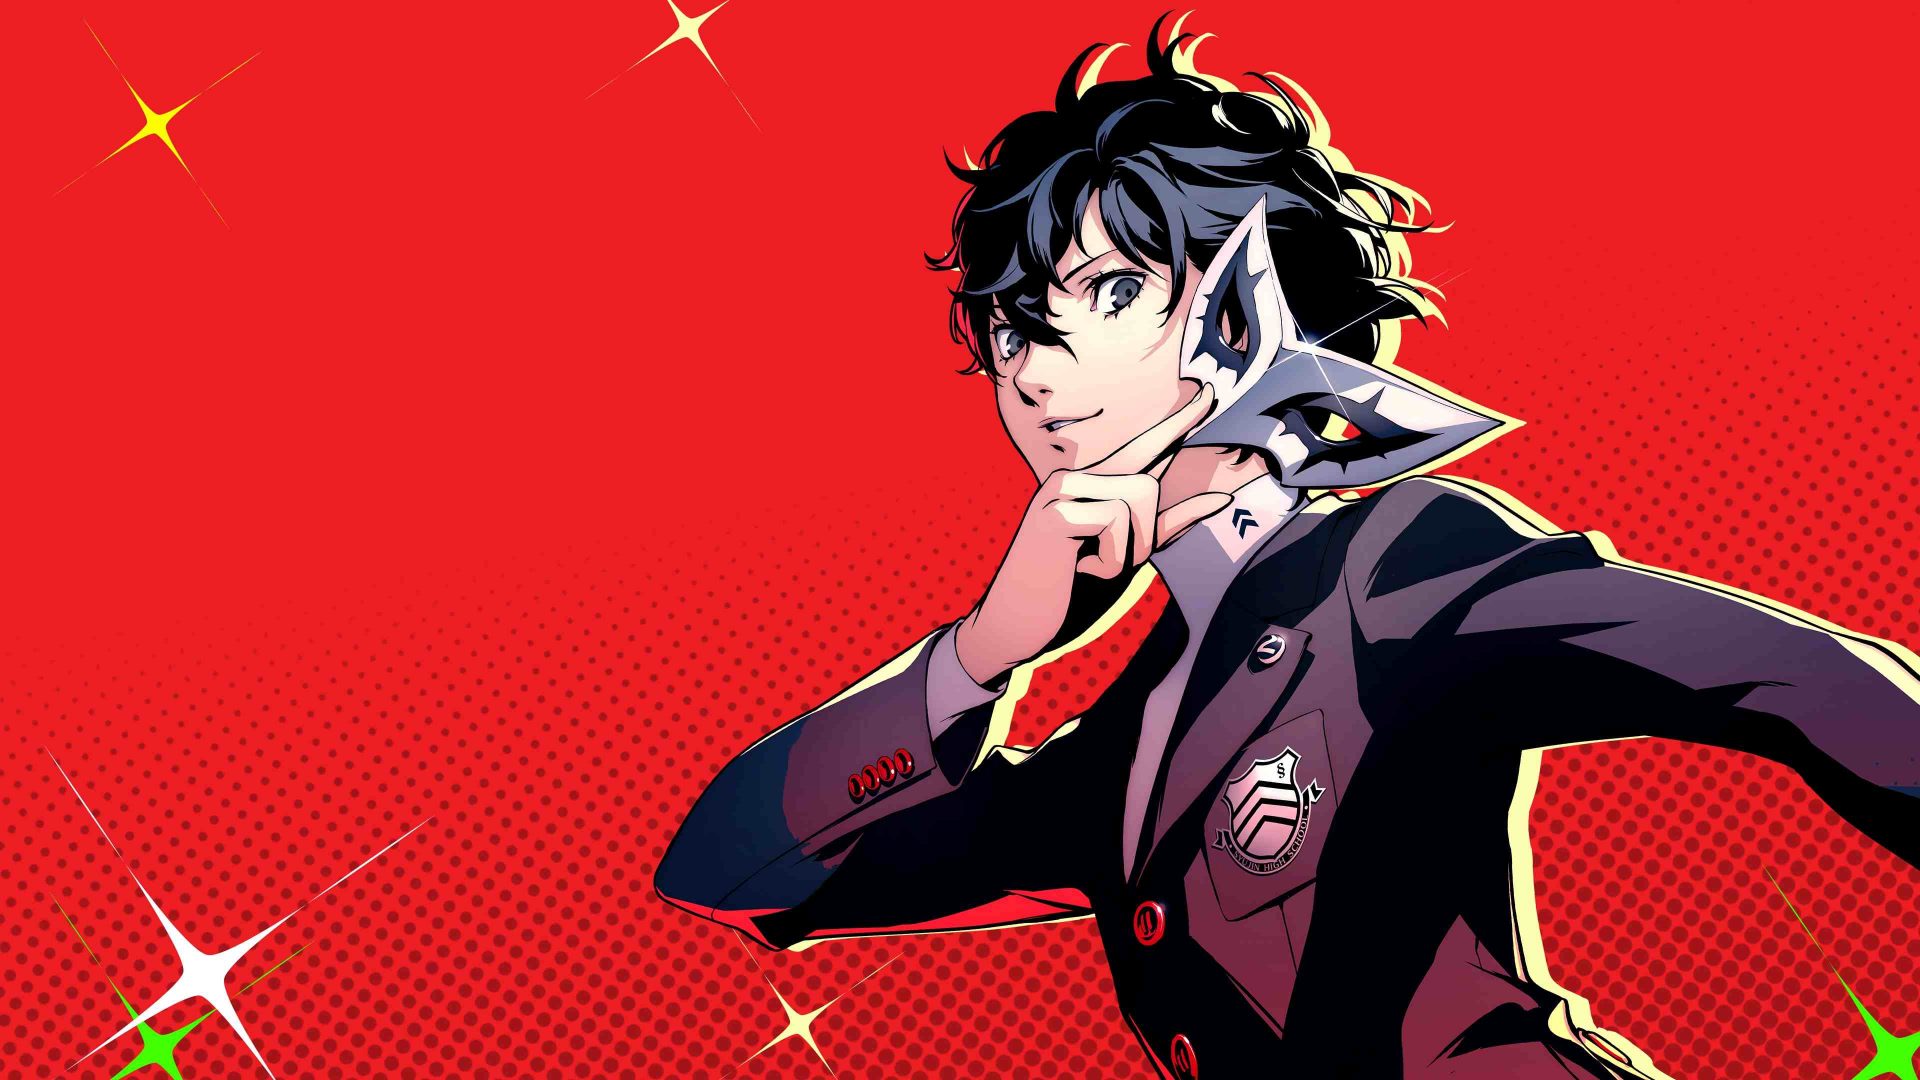 Persona 5 Royal Holds up Pretty Well on Nintendo Switch in Early